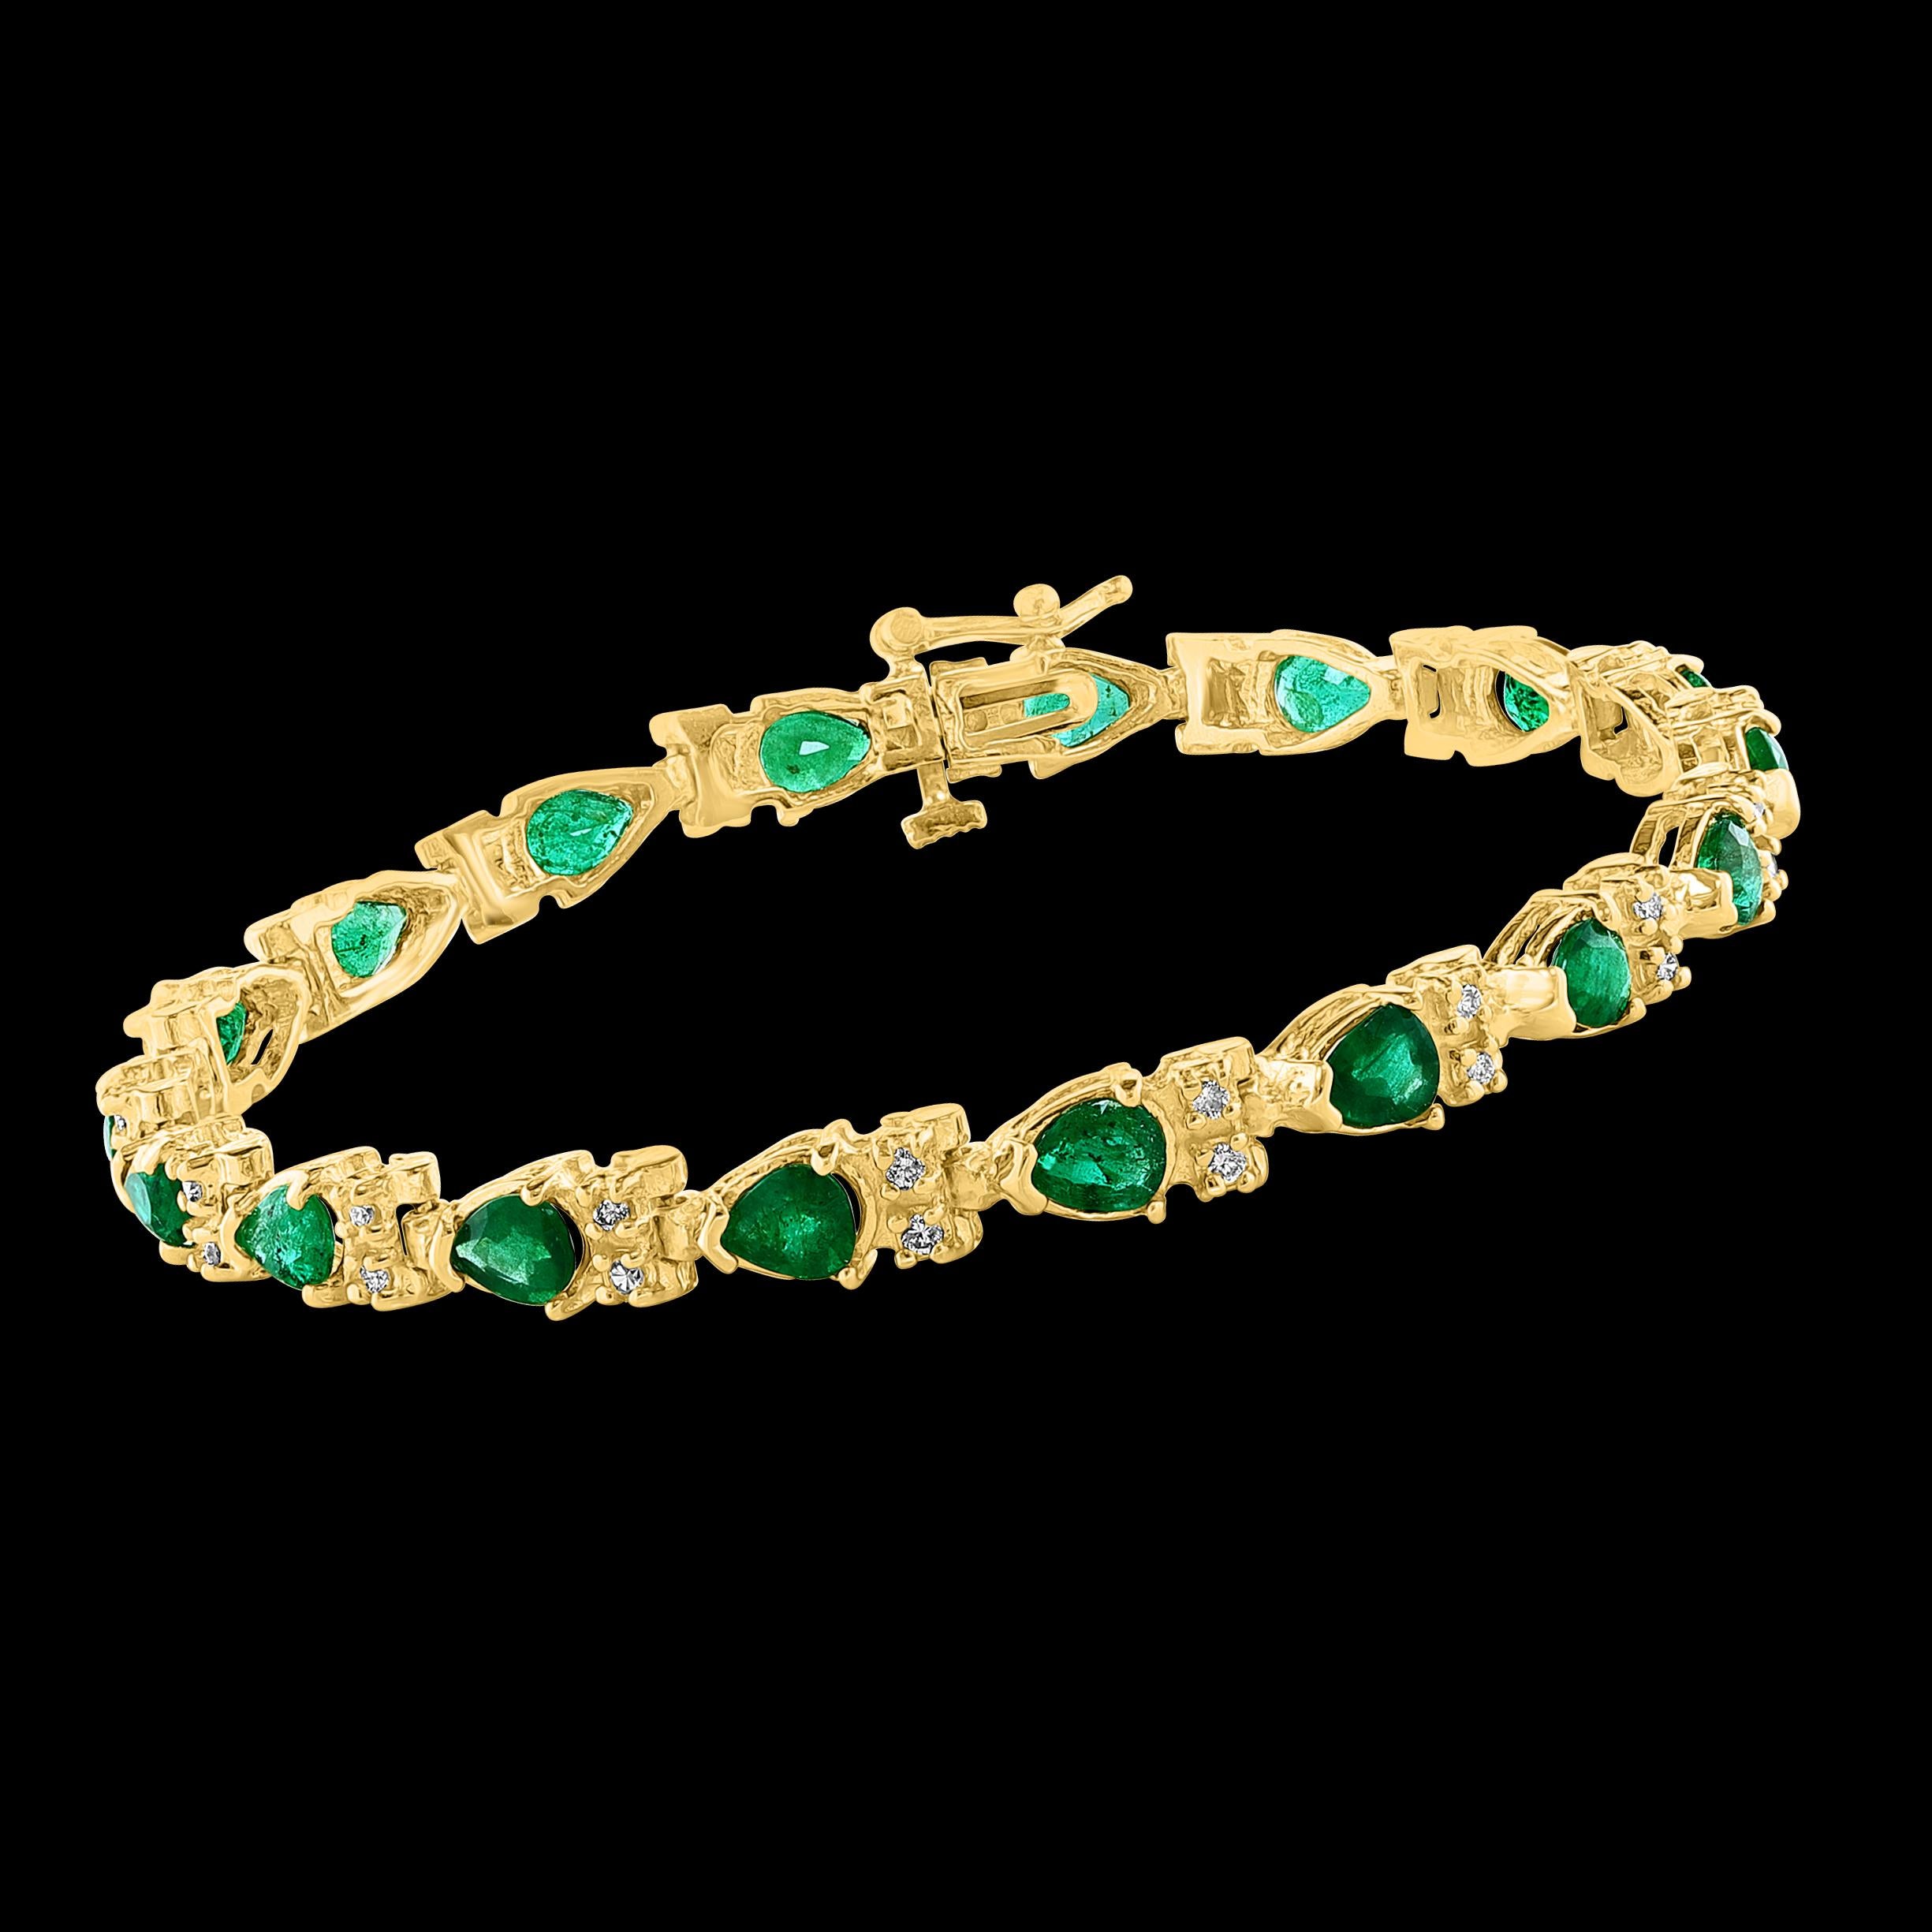 
Approximately 9 Ct Natural 18 Oval Stone Emerald & Diamond 14 Kt Yellow Gold Bracelet
All  Emeralds are Oval Shape  , very fine quality
 Very  intense green color Total emerald weight is approximately 9 ct . There are some inclusions in the